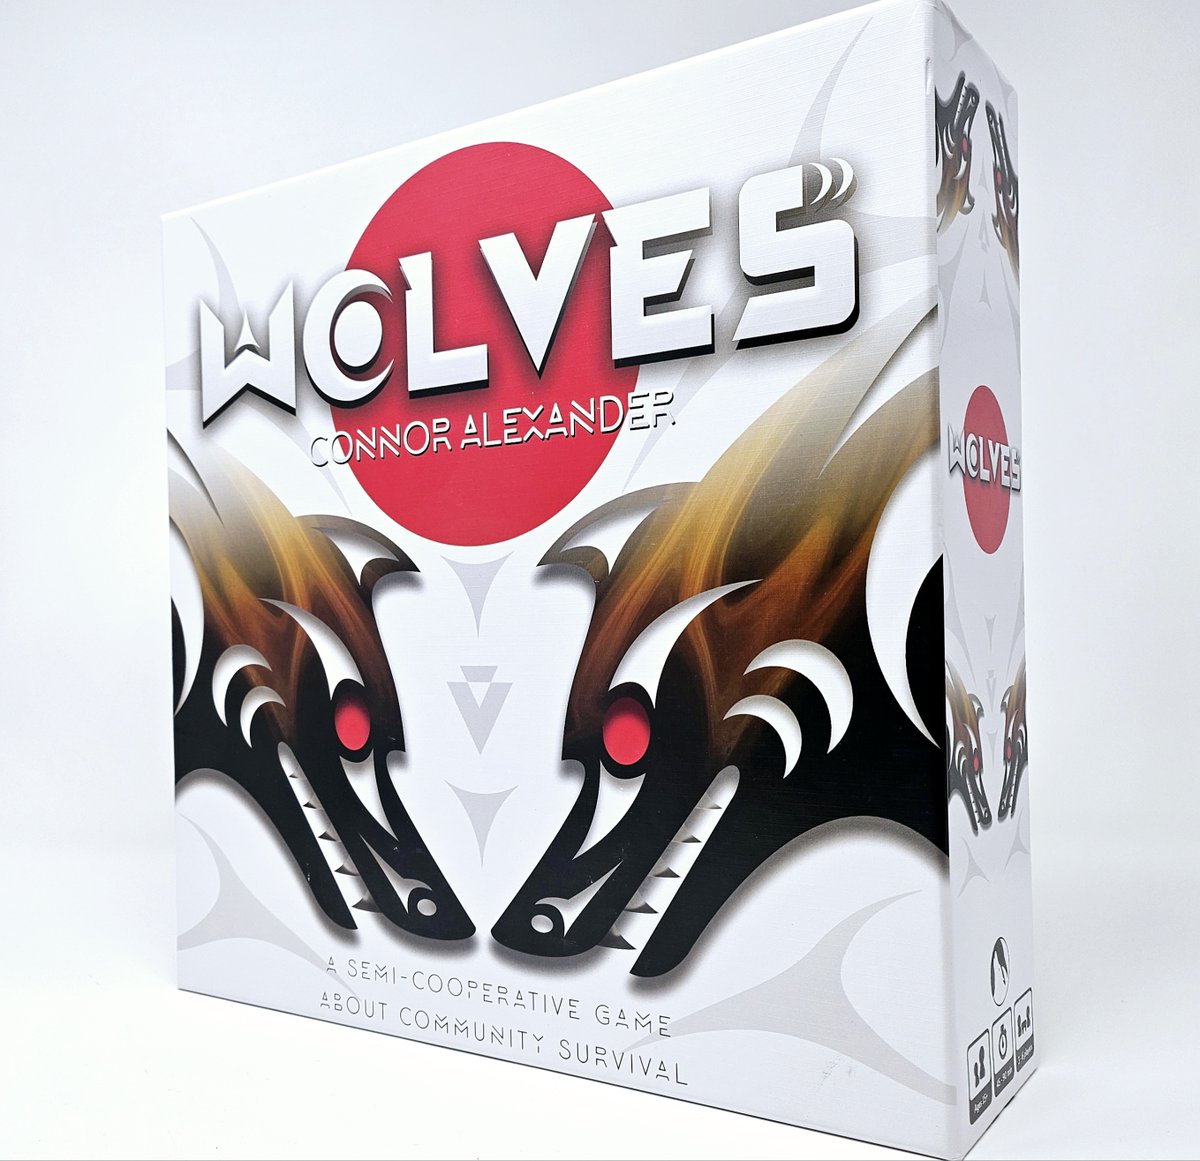 To celebrate the launch today of our new game, Wolves, we've marked a ton of other things in our webstore at 30% off! You can find Wolves at your local game store, our webstore or on Amazon. bit.ly/3C6HeQq #boardgames #tabeltop #ttrpg #NativeTwitter